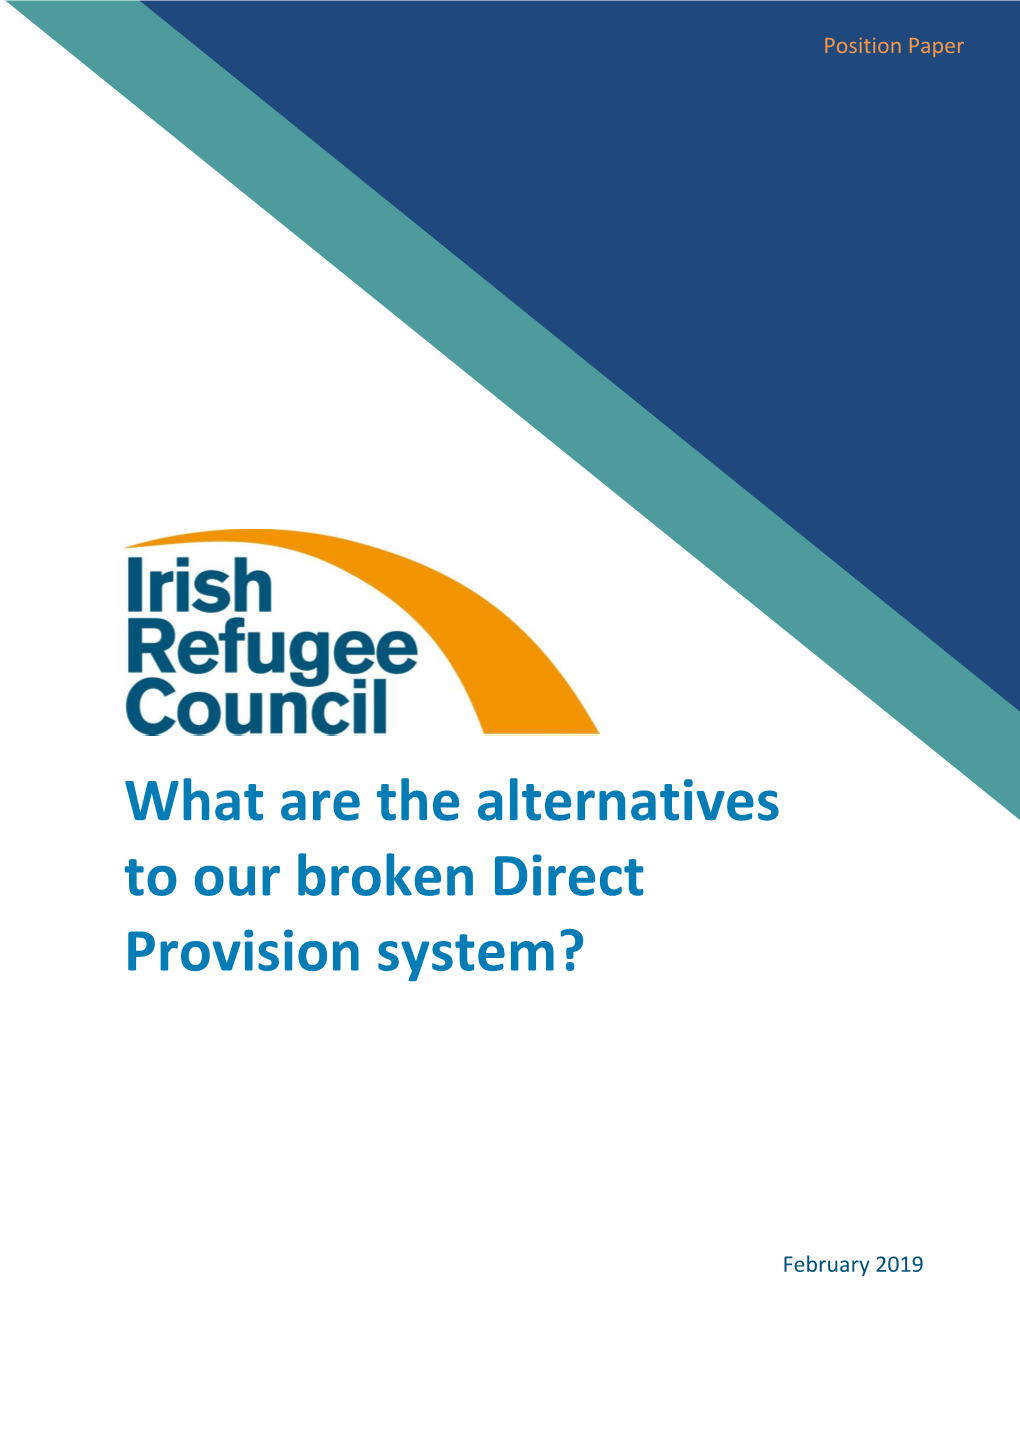 What Are the Alternatives to Our Broken Direct Provision System?